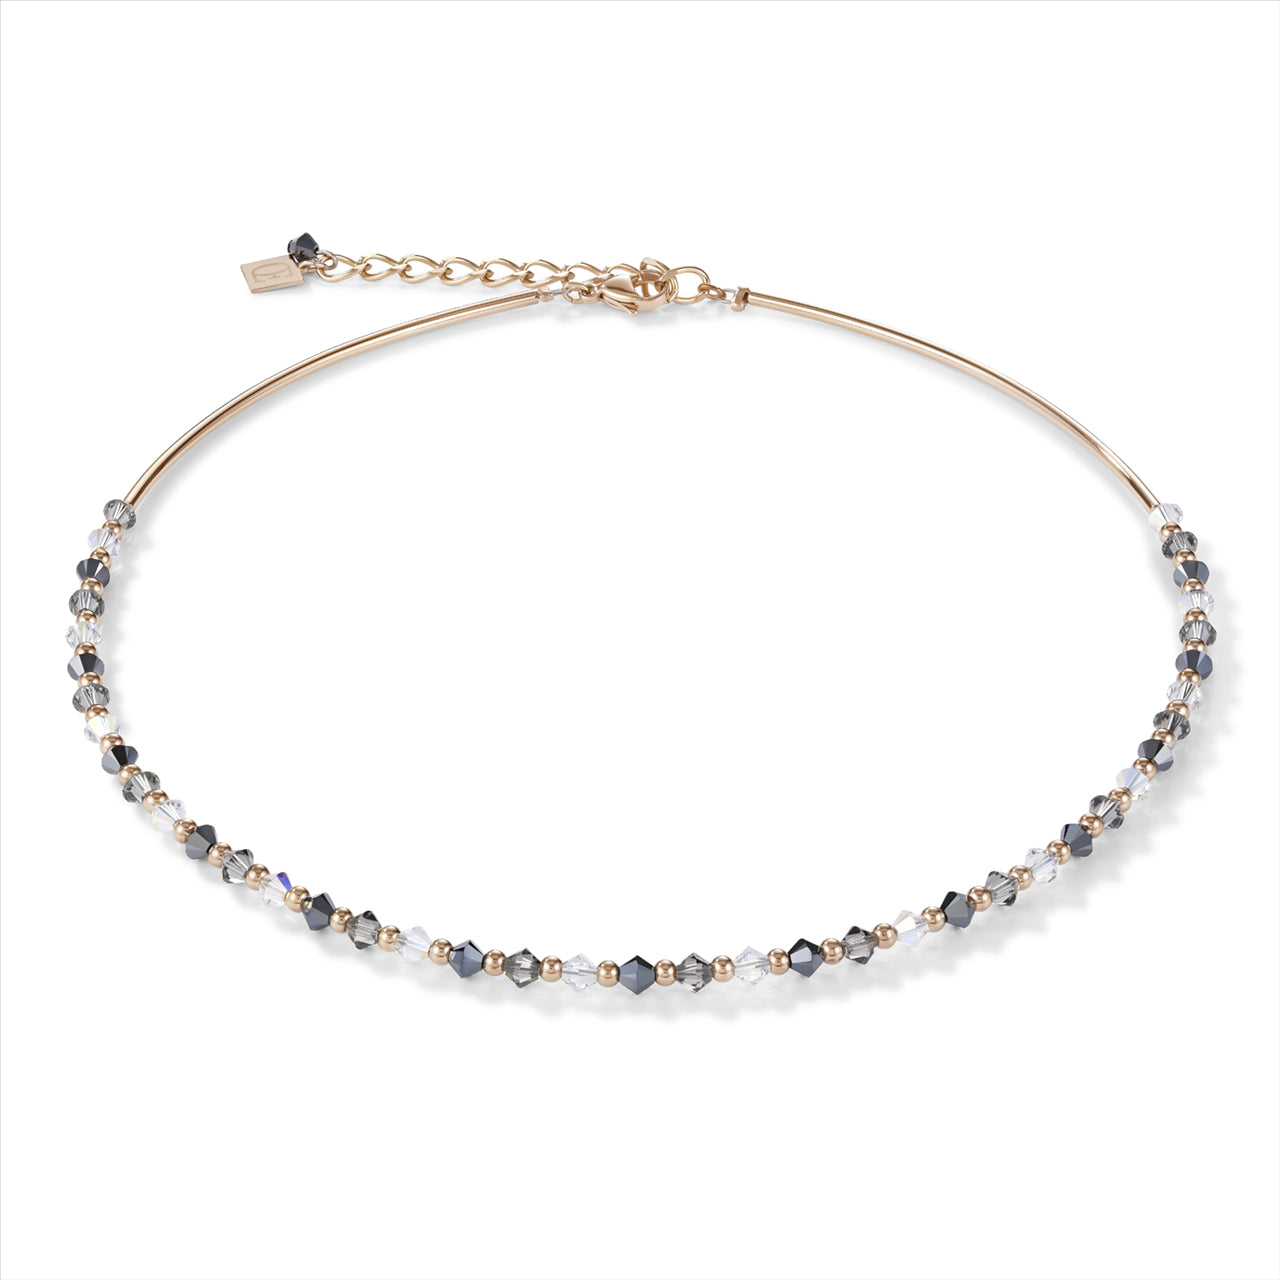 Necklace - CDL - Rose gold plated stainless steel with multi coloured Swarovski crystals